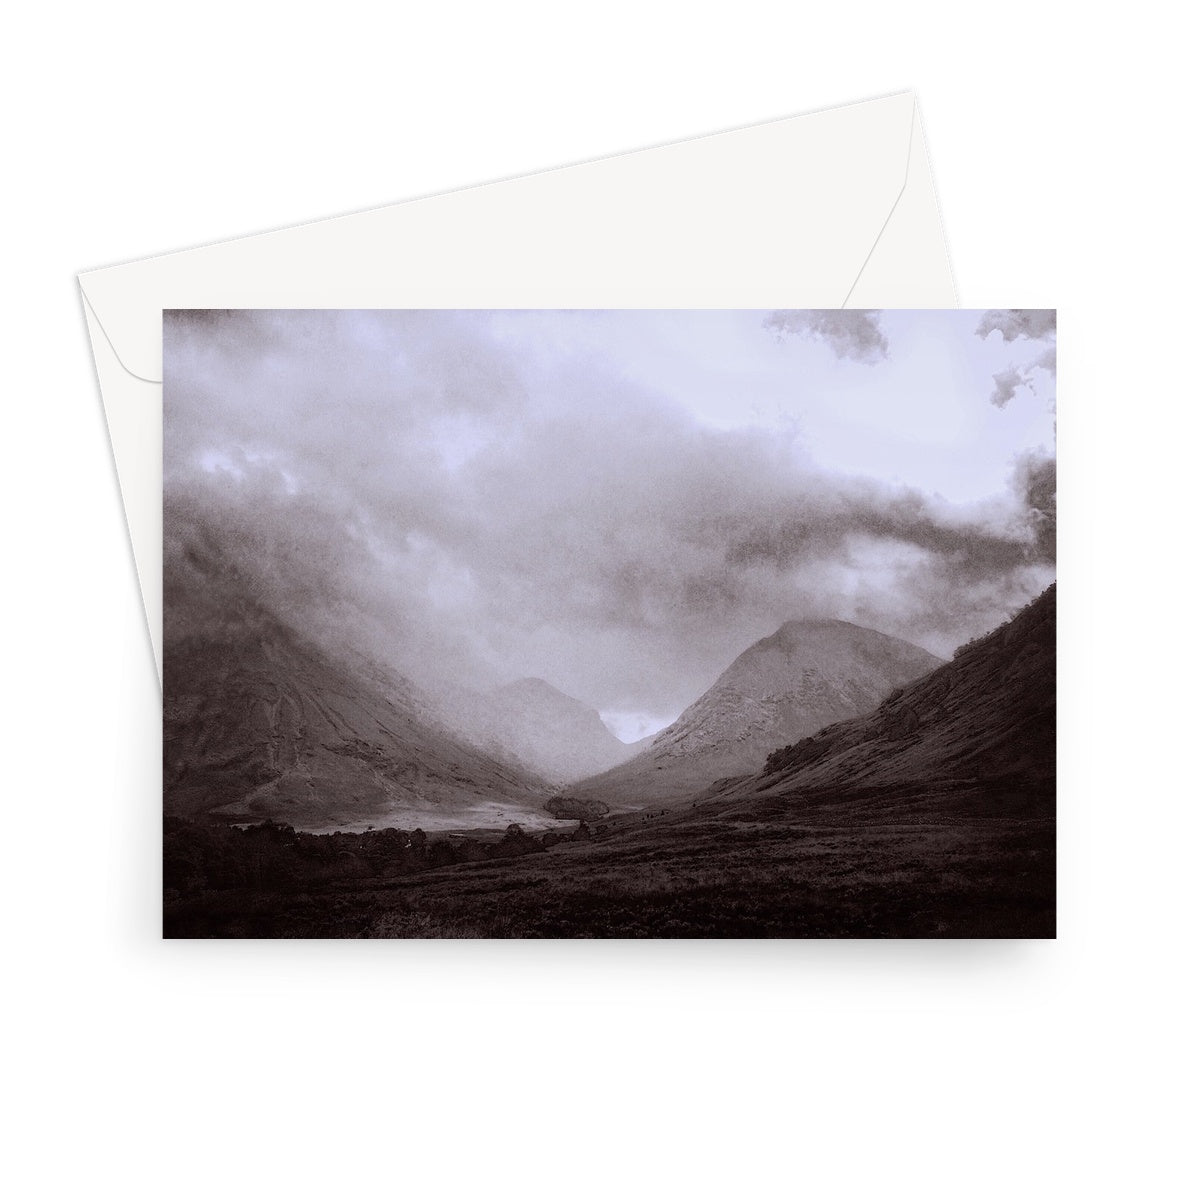 Glencoe Mist Art Gifts Greeting Card-Greetings Cards-Glencoe Art Gallery-7"x5"-10 Cards-Paintings, Prints, Homeware, Art Gifts From Scotland By Scottish Artist Kevin Hunter